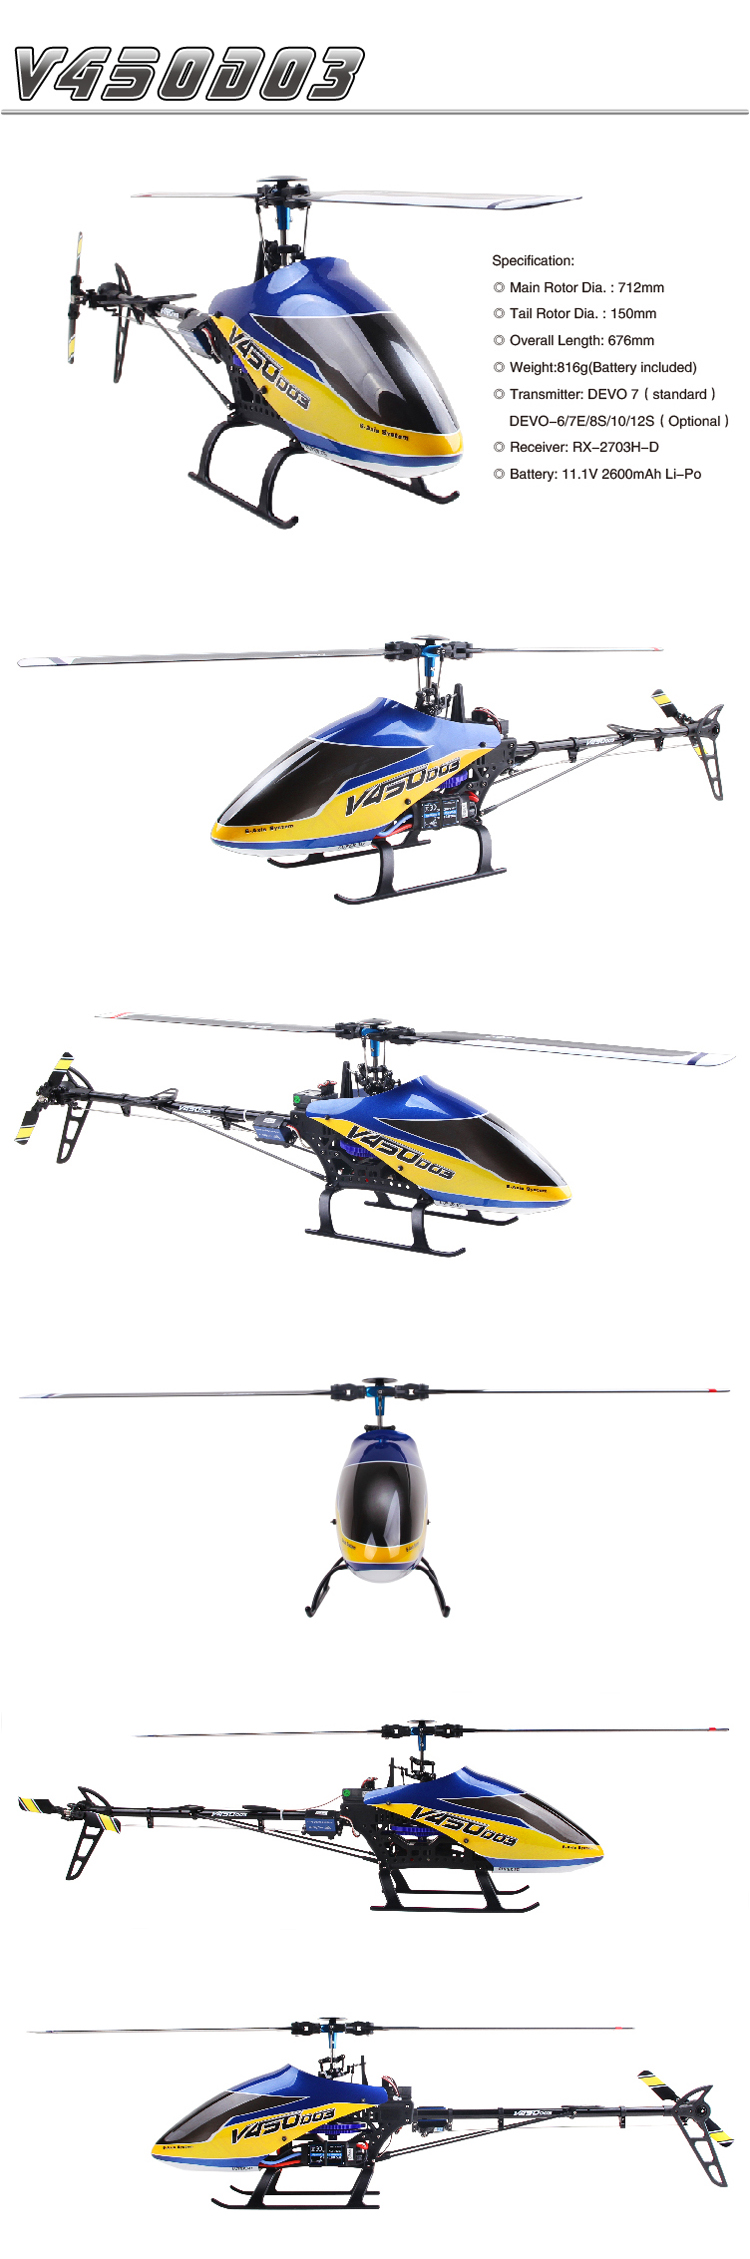 Walkera-V450D03-Generation-II-24G-6CH-6-Axis-Gyro-Brushless-RC-Helicopter-RTF-With-Devo-7-76768-3